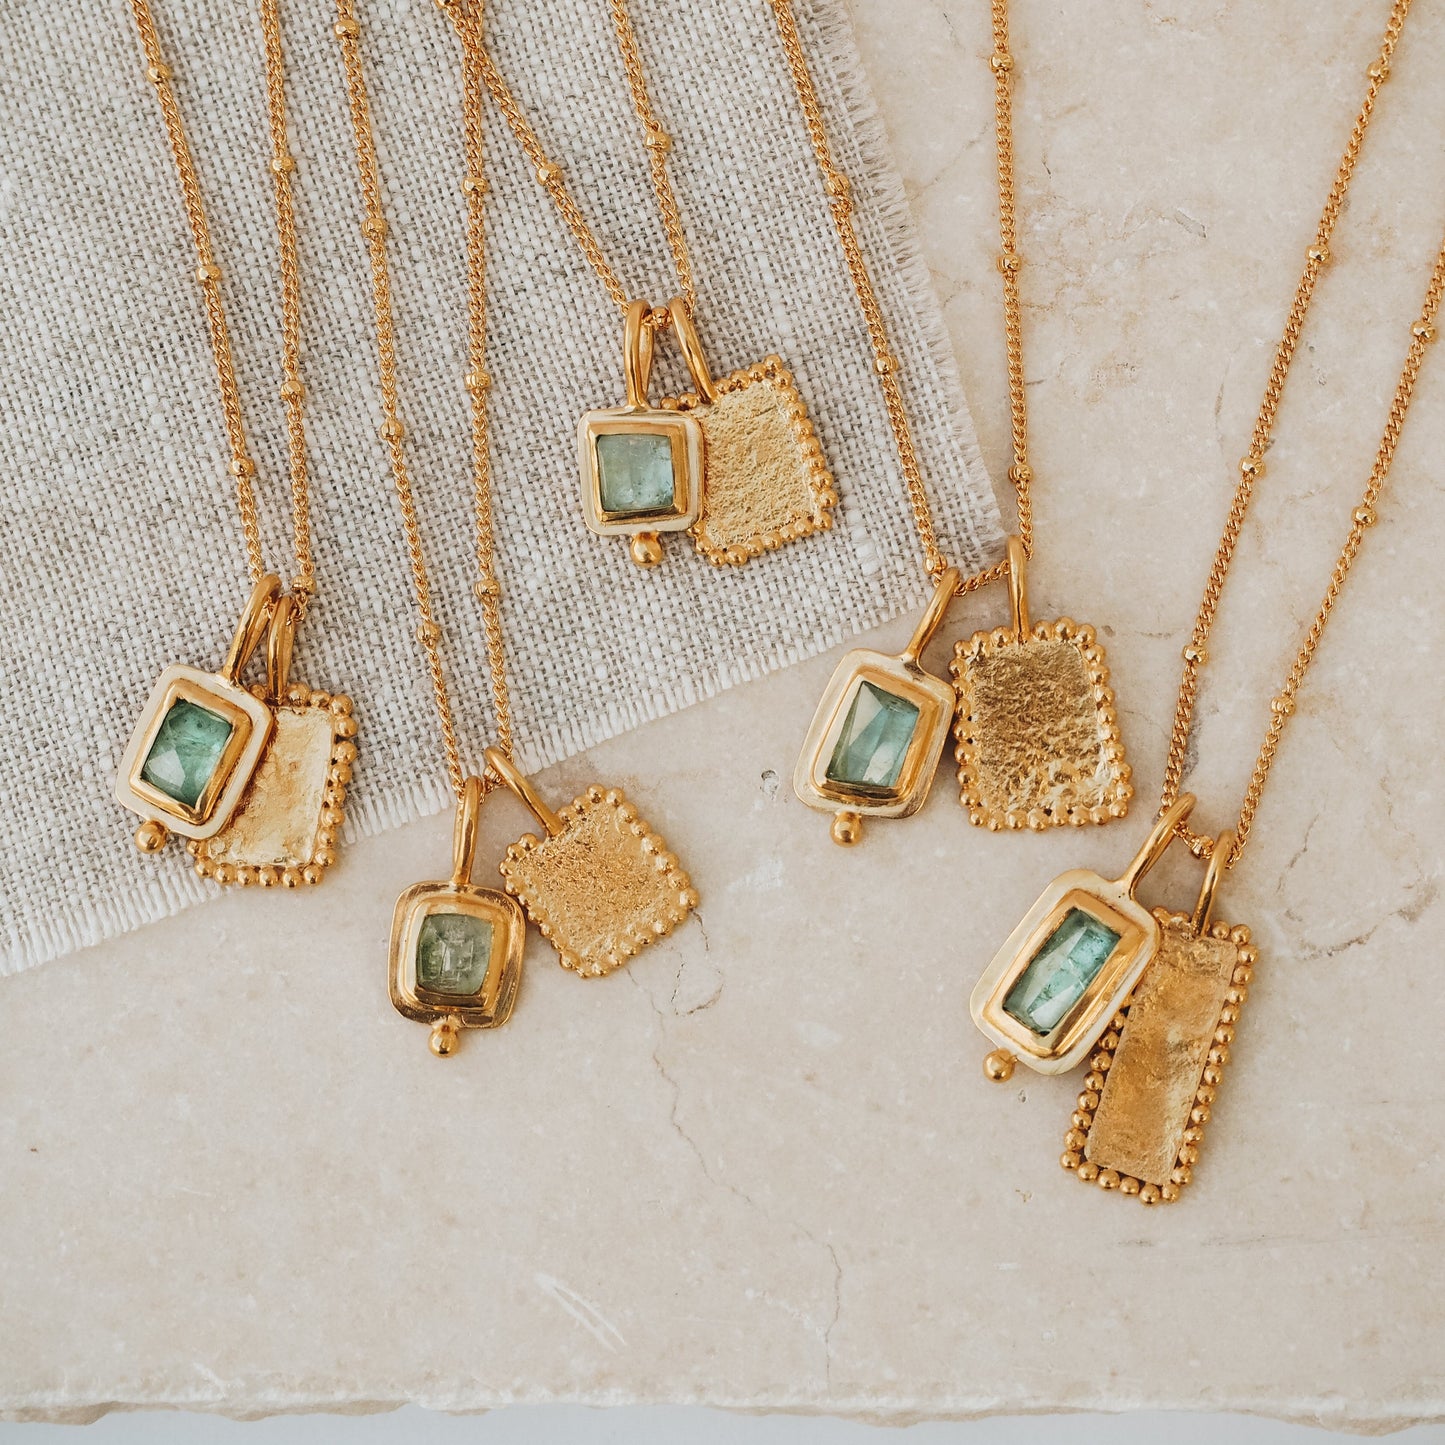 A group of hand crafted necklaces in gold with blue geometric gemstones